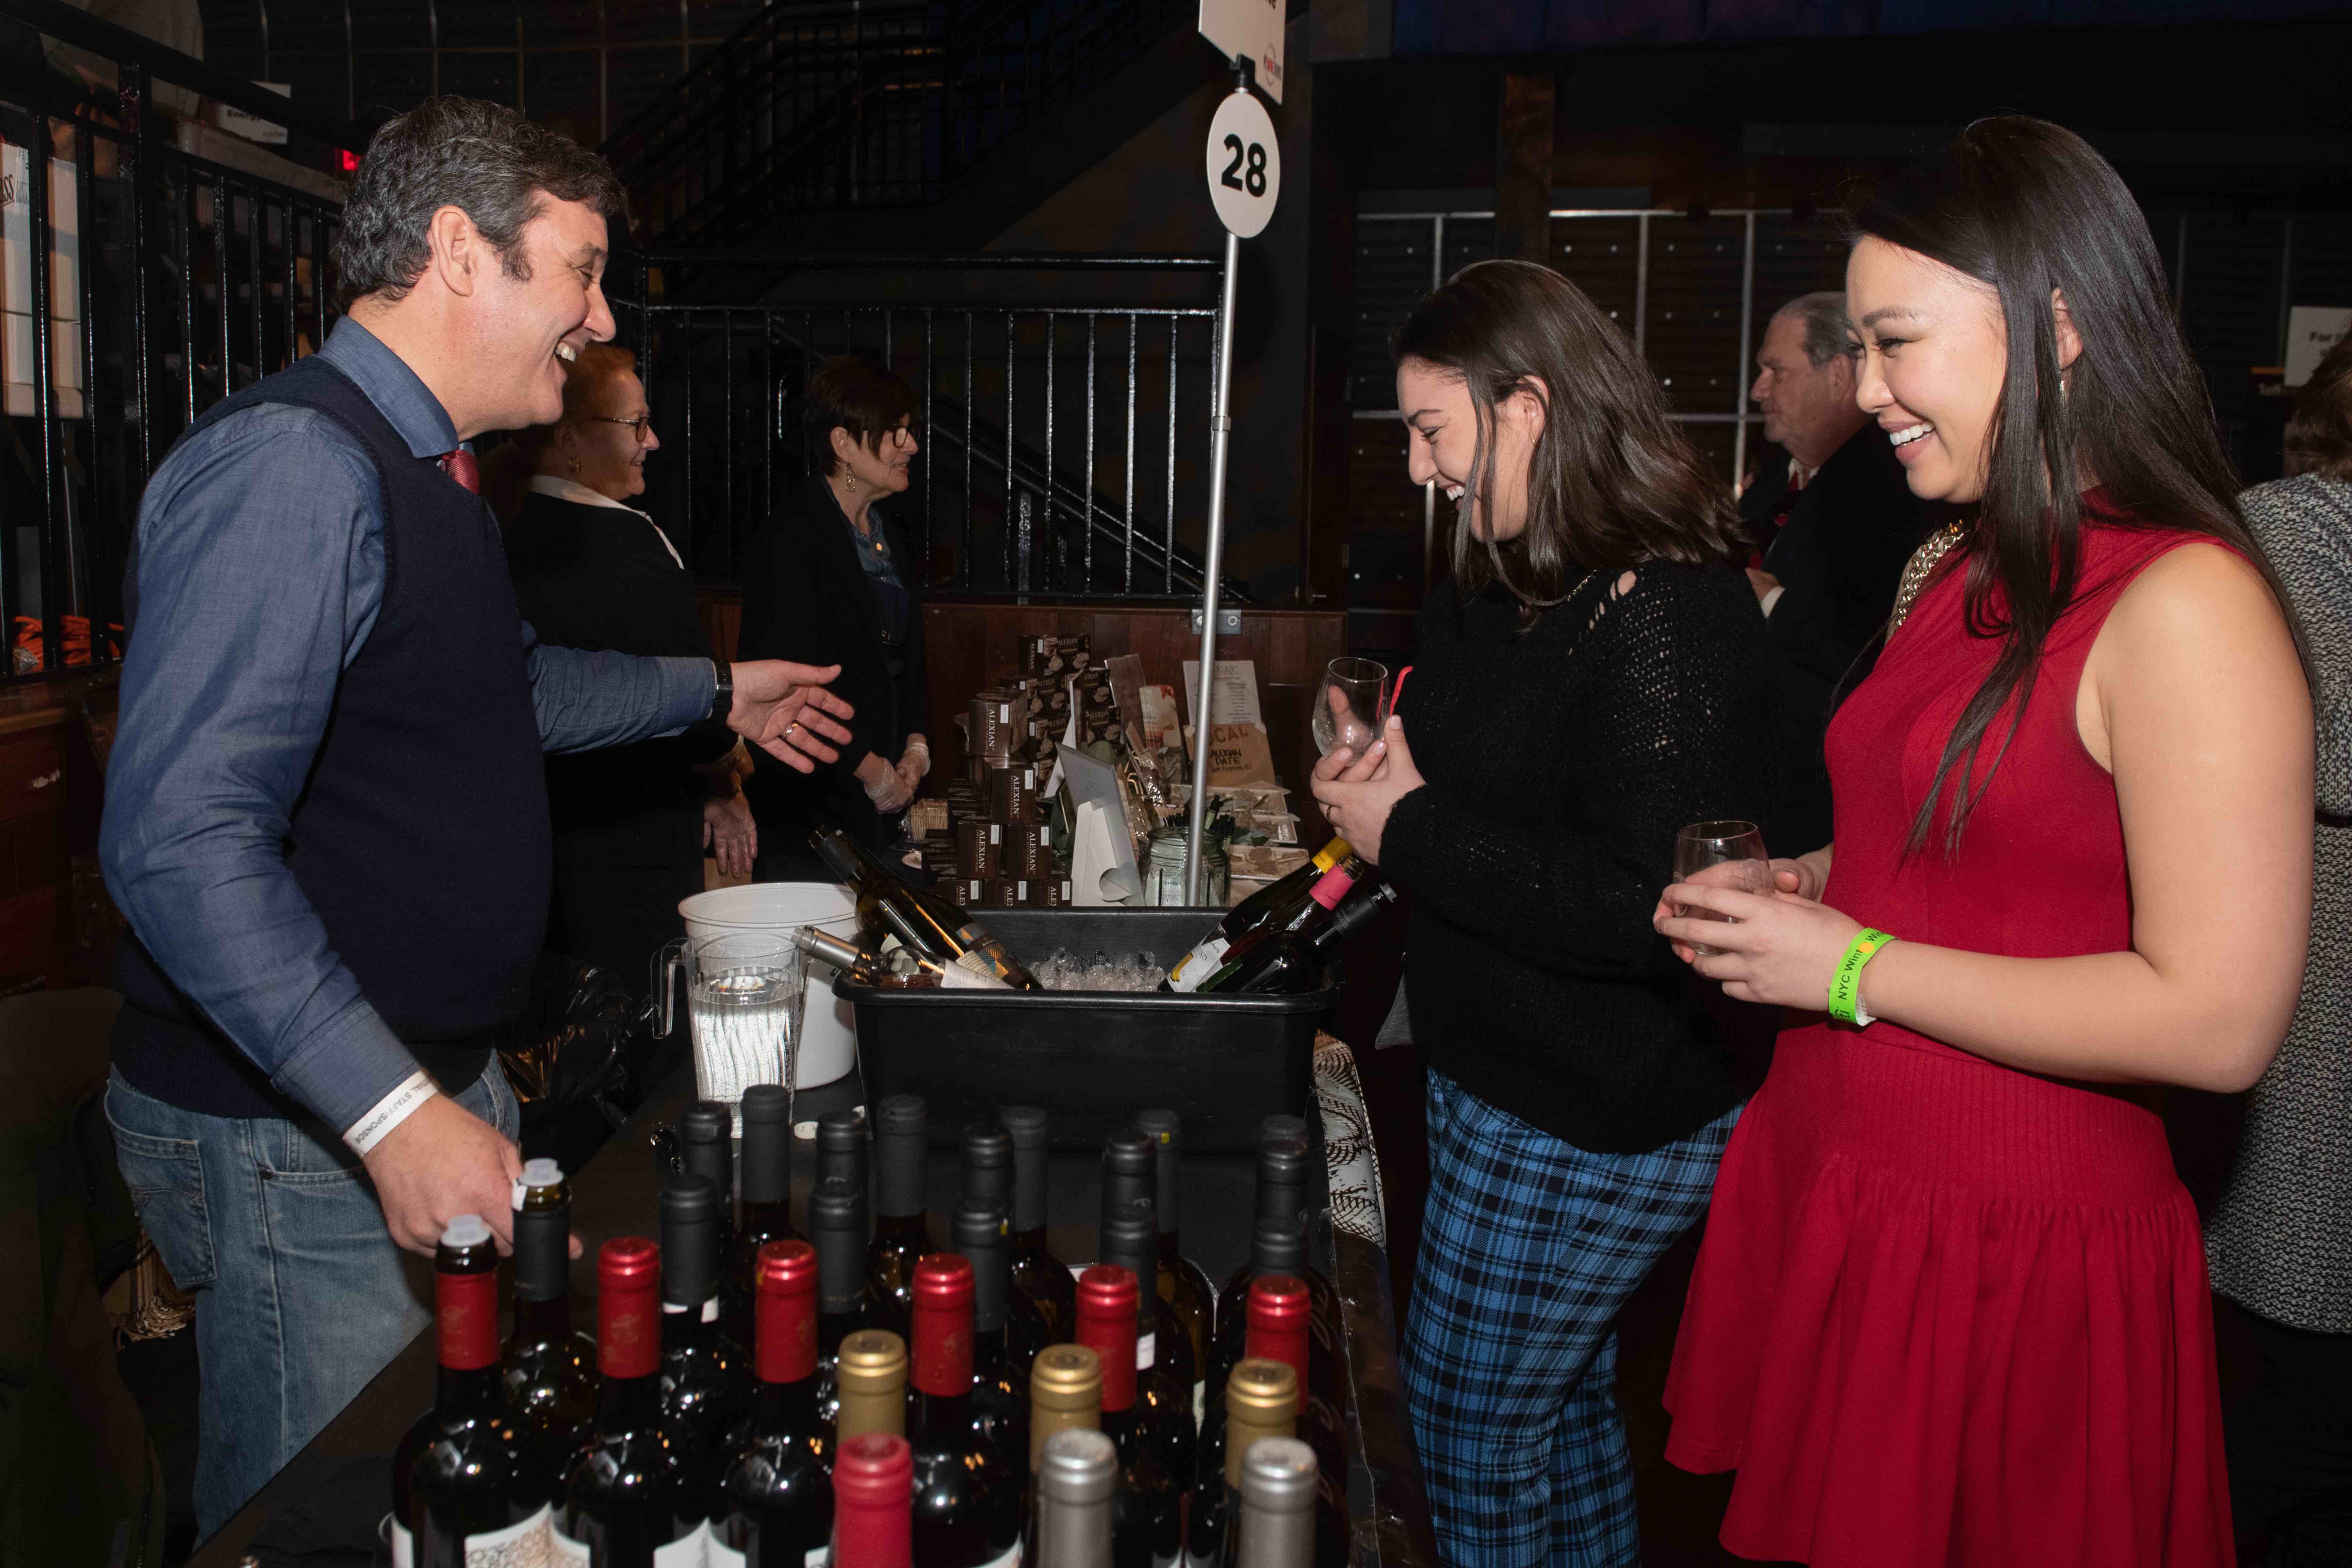 The NYC Winter Wine & Food Festival now in its 11th year moves to Webster Hall. The Mar 7 event presented by Citi offers 100+ wines, artisan foods, light fare + live music. Info: NewYorkWineEvents.com